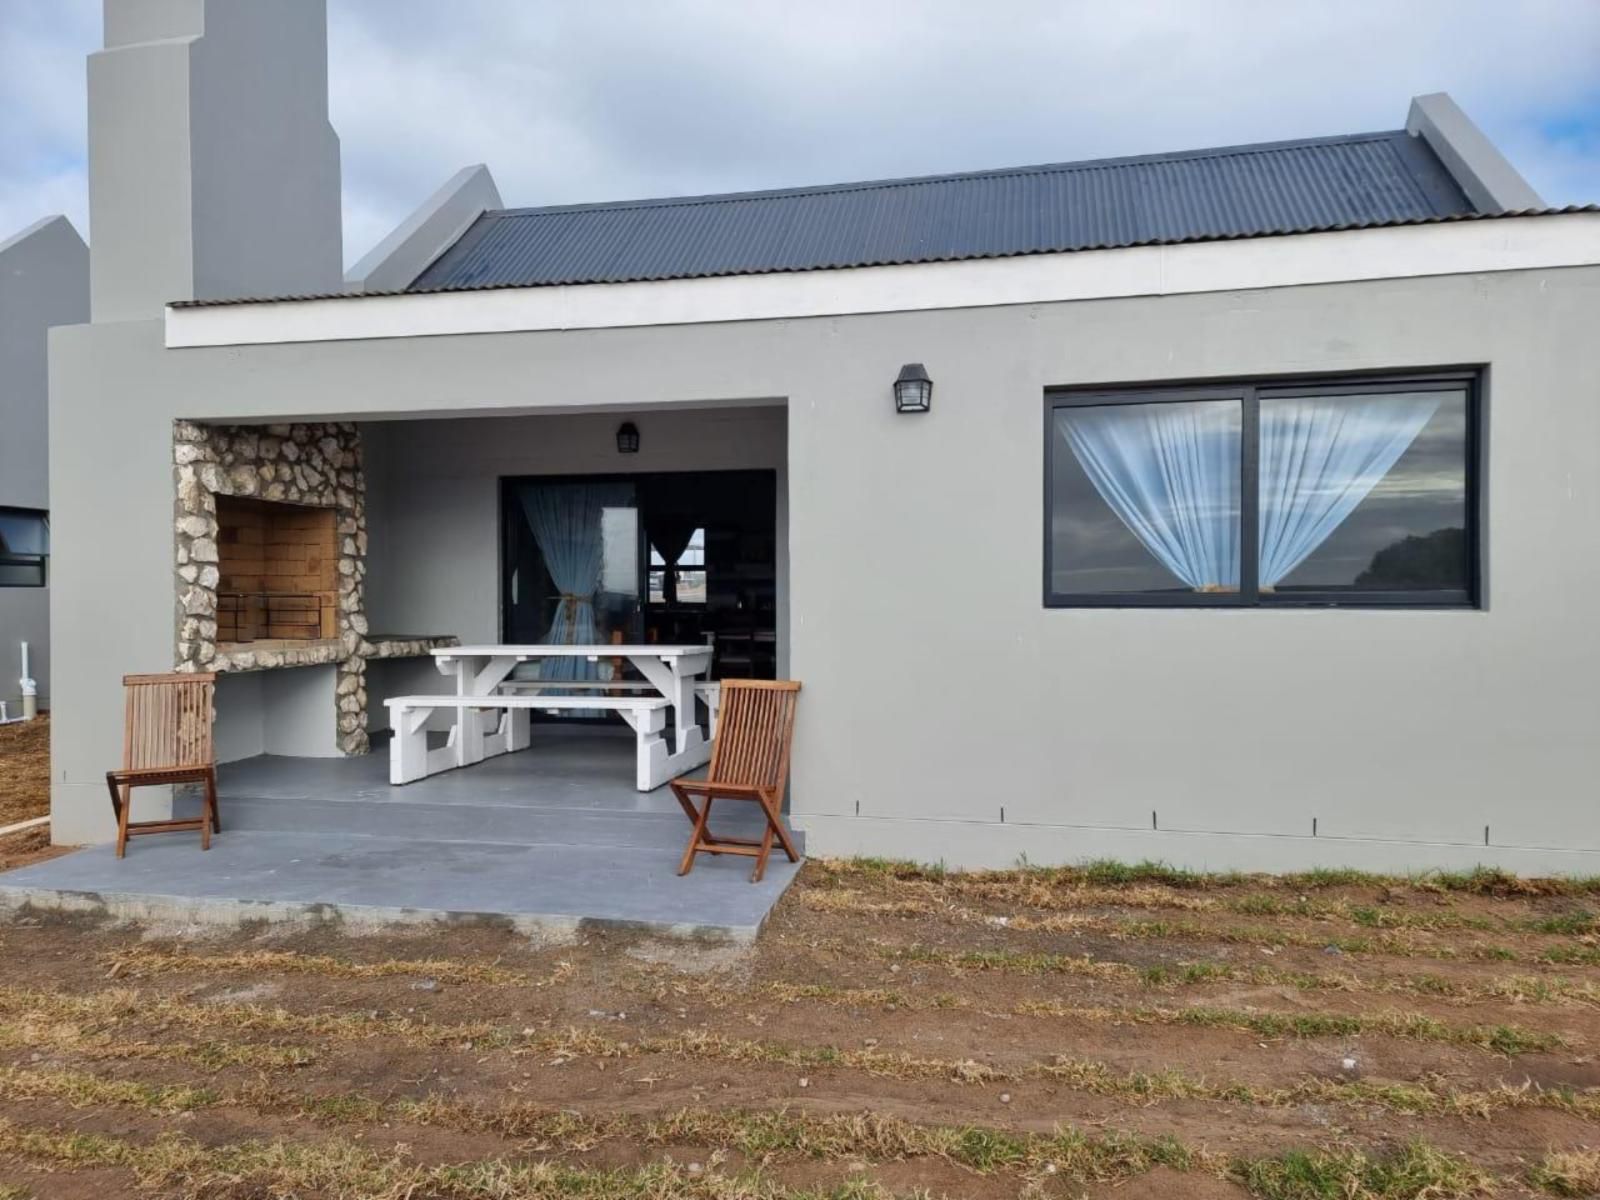 Rustic Hill Accommodation Olifantskop Langebaan Western Cape South Africa House, Building, Architecture